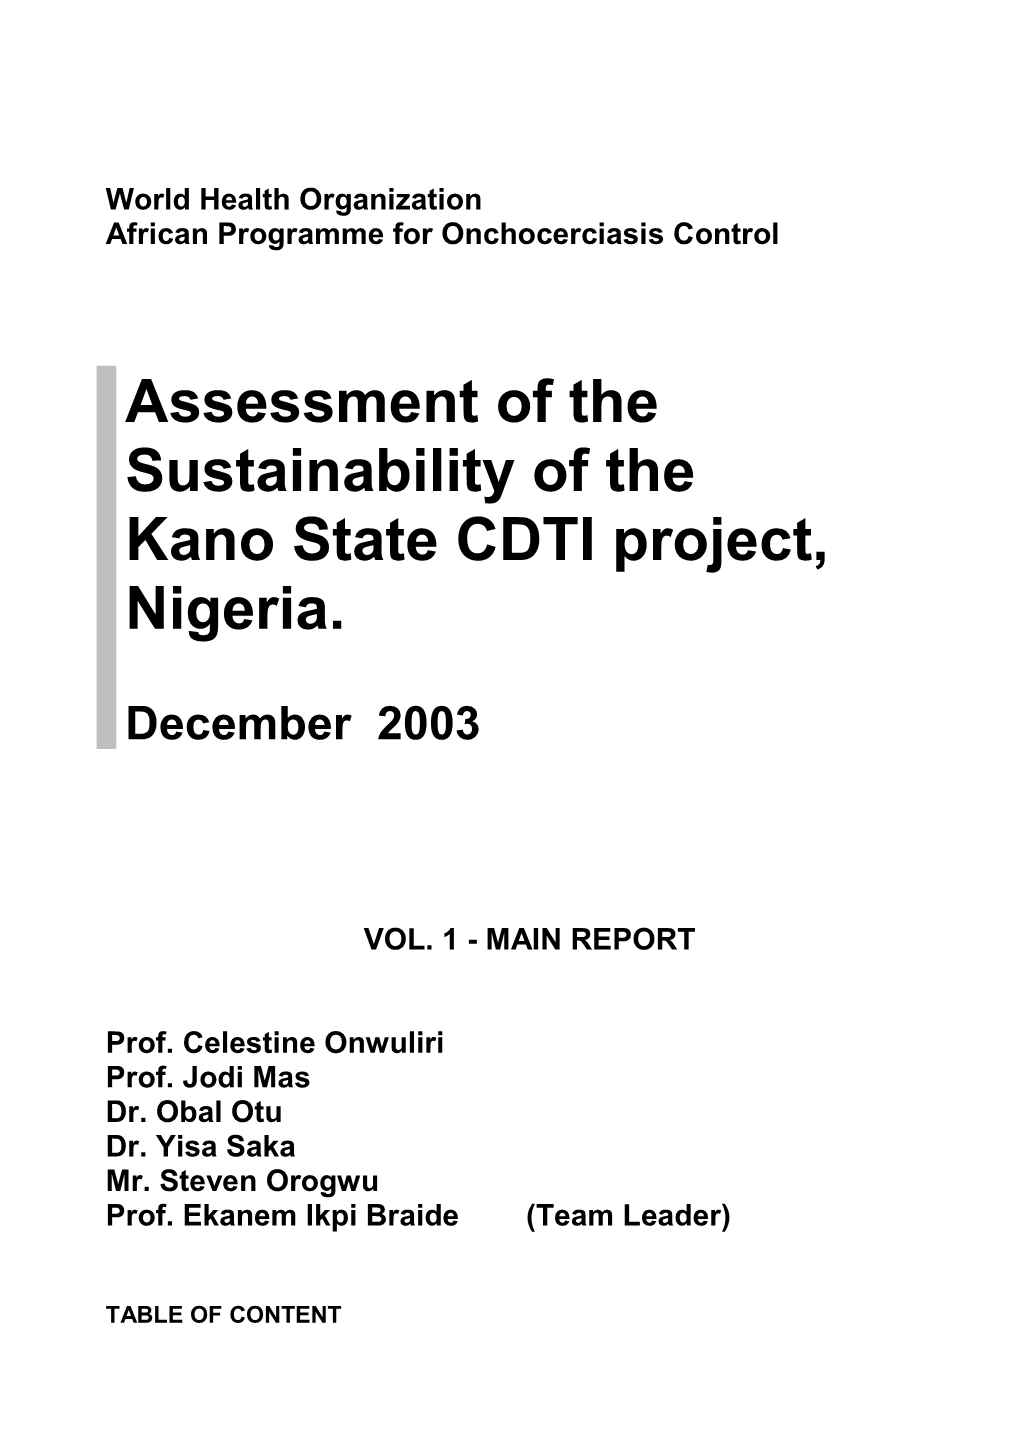 Assessment of the Sustainability of the Kano State CDTI Project, Nigeria